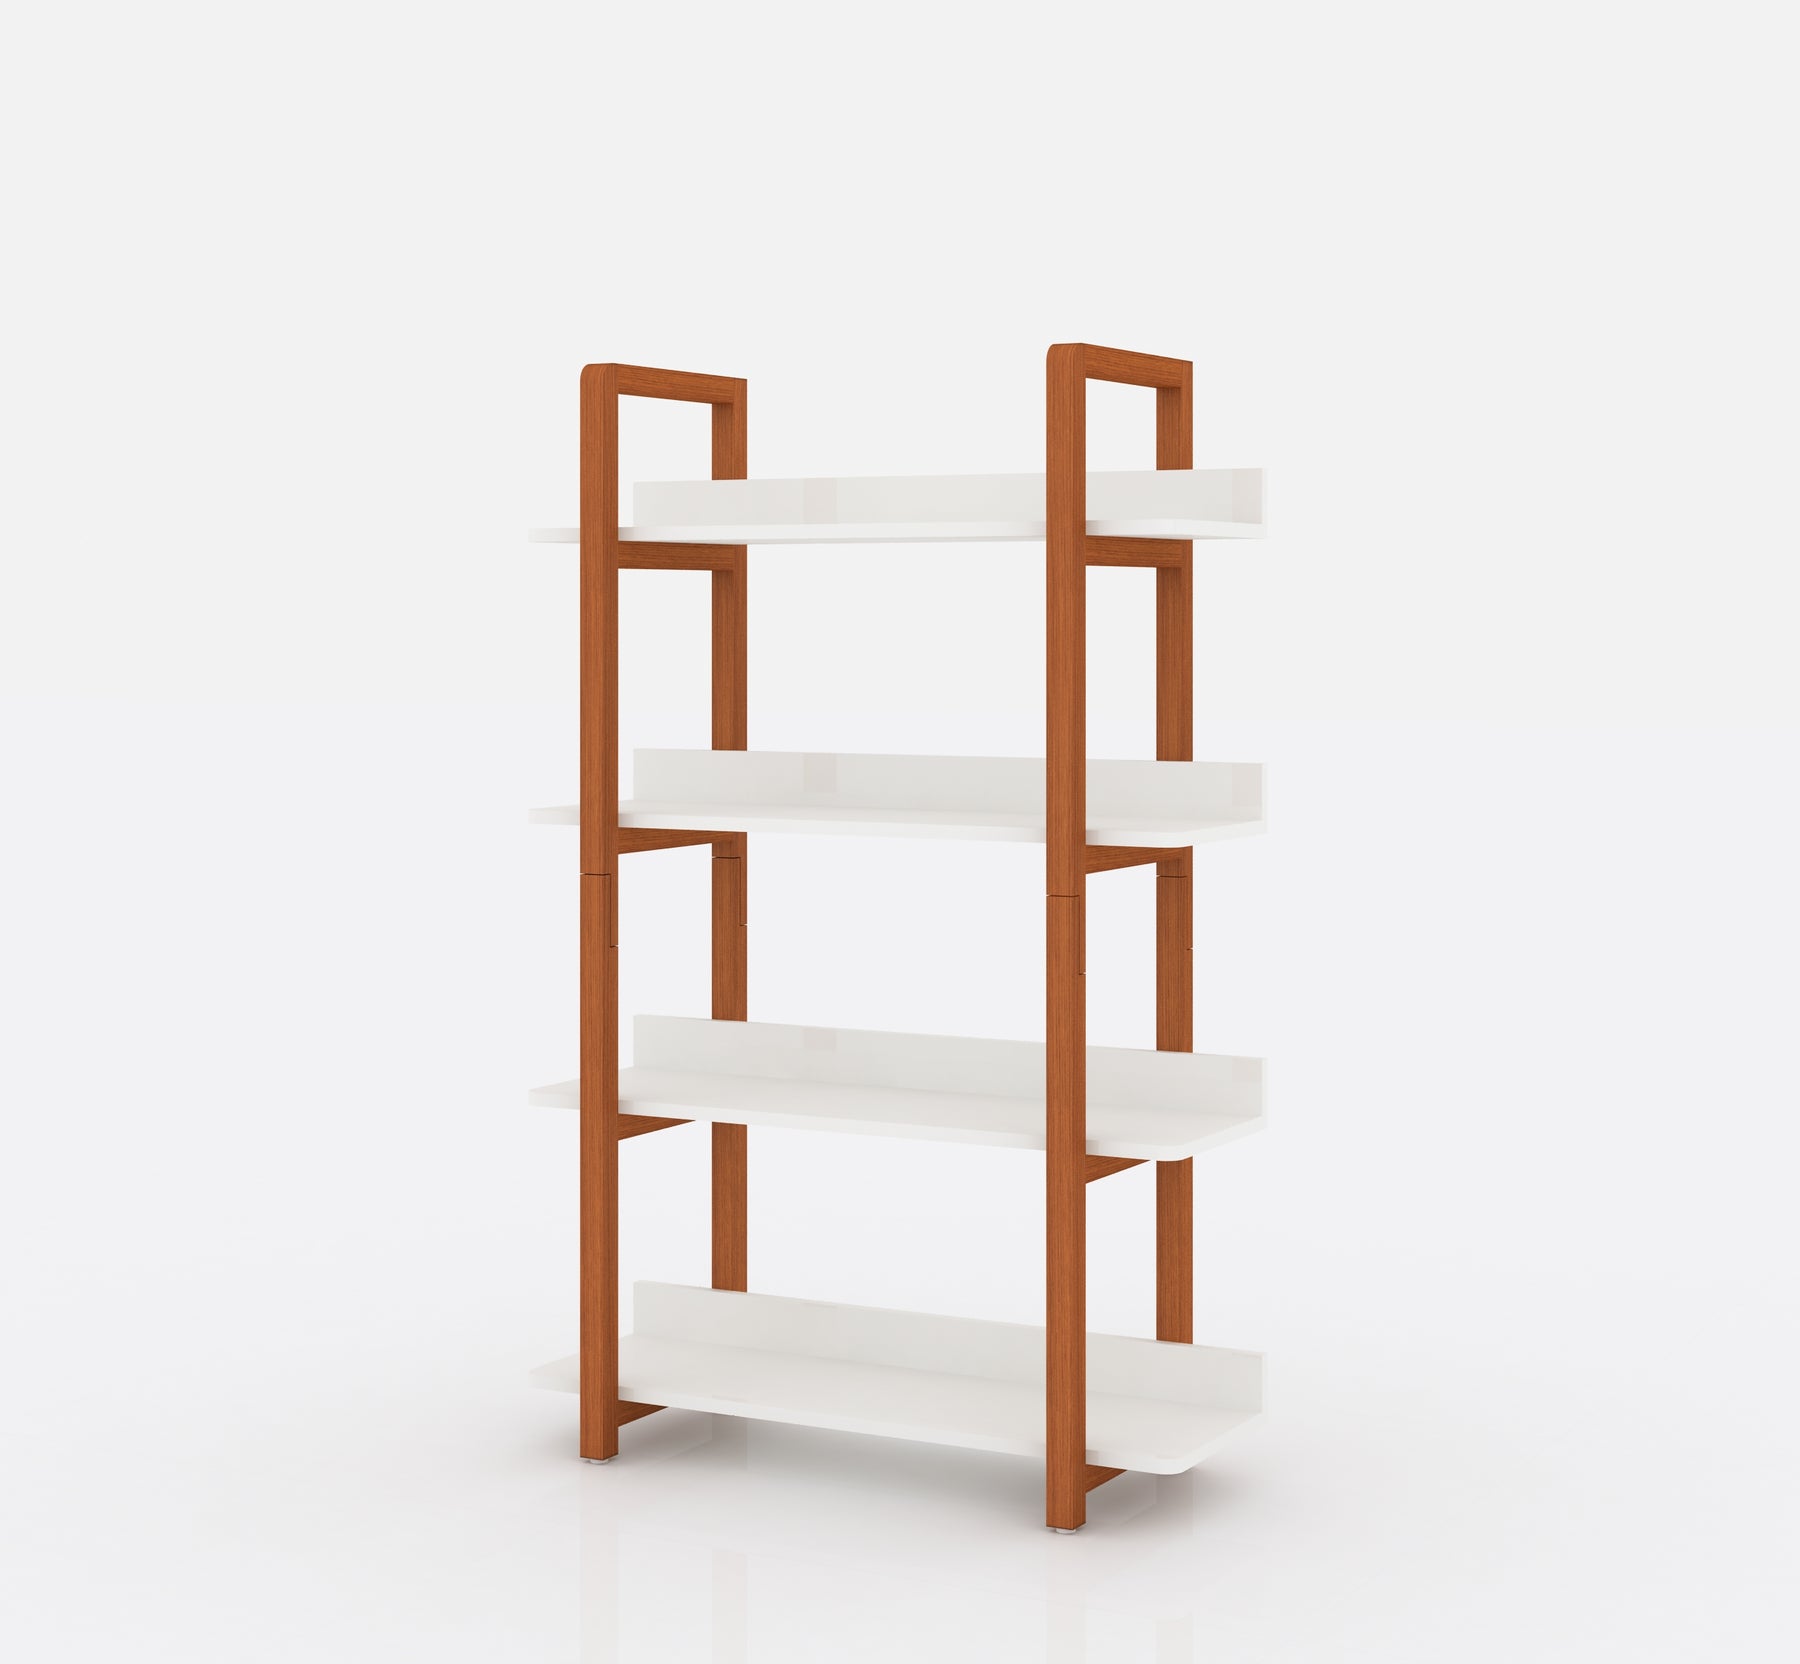 Solid wood bookshelf,The four layer multifunctional open shelf can also be used as a bookshelf or plant rackbookshelf or plant rack - Natural+Wood- KHAN SHOP LLC 4